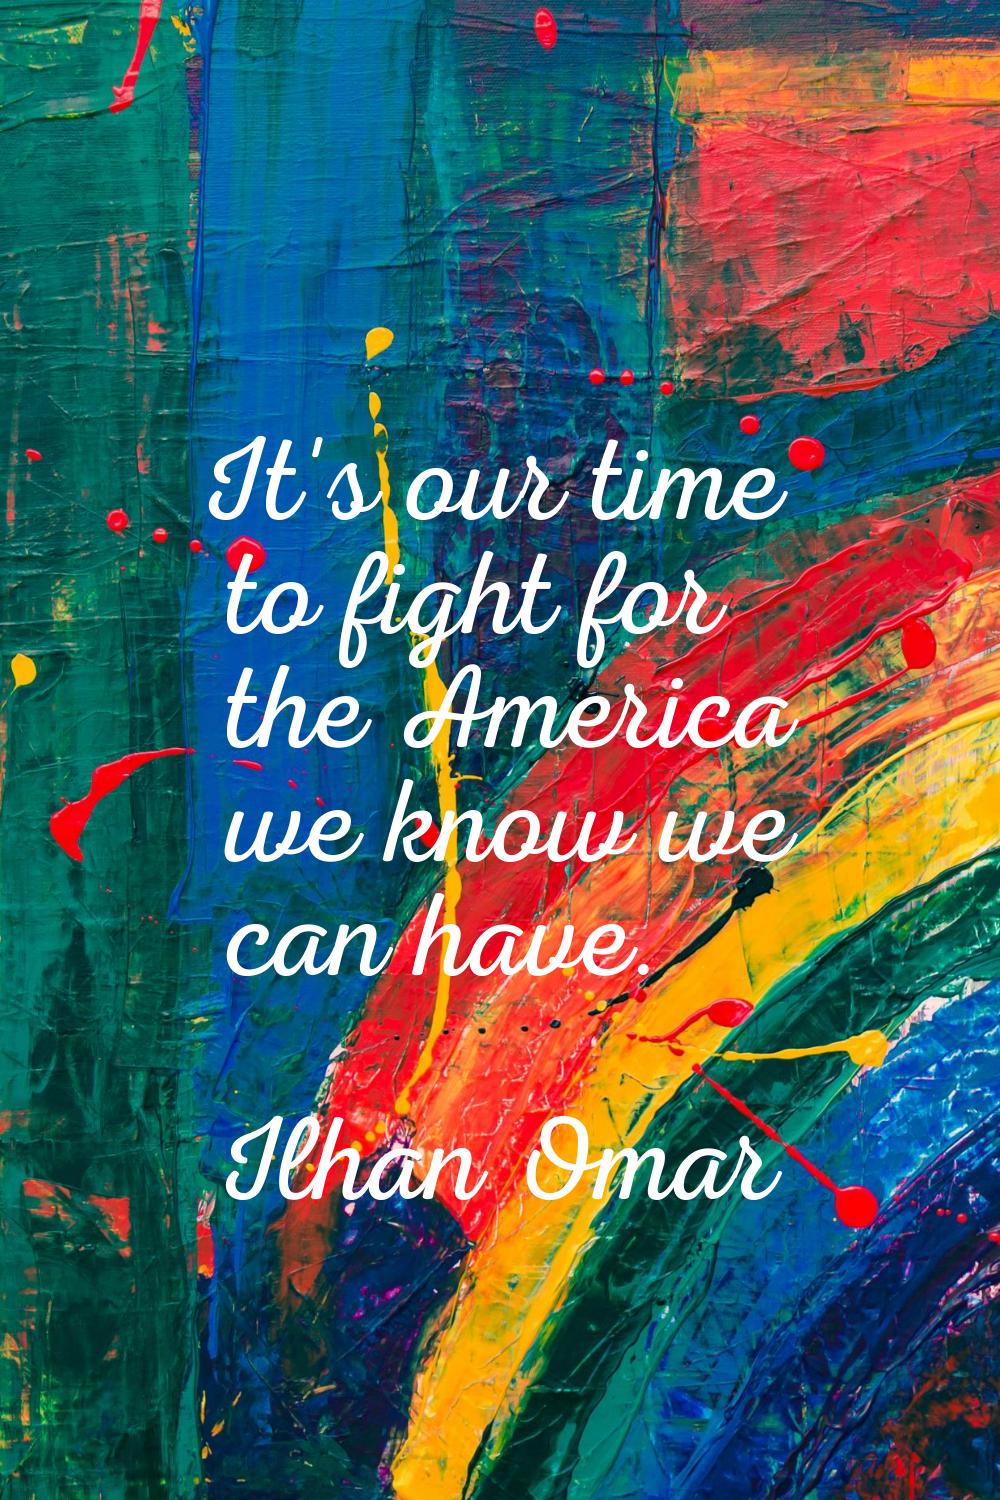 It's our time to fight for the America we know we can have.